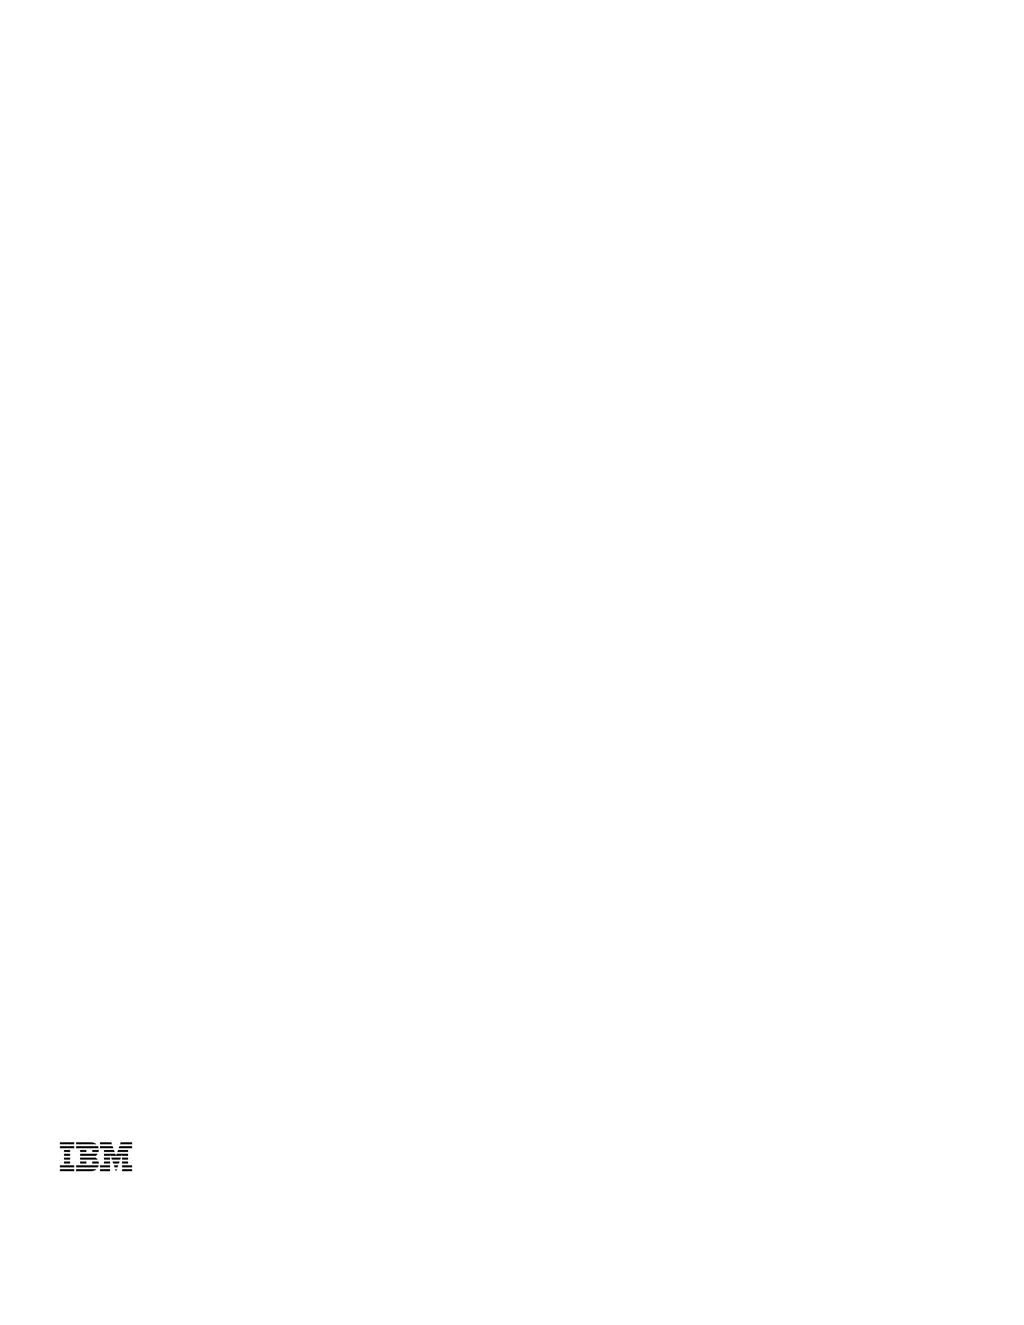 An IBM Proof of Technology Using Hive for